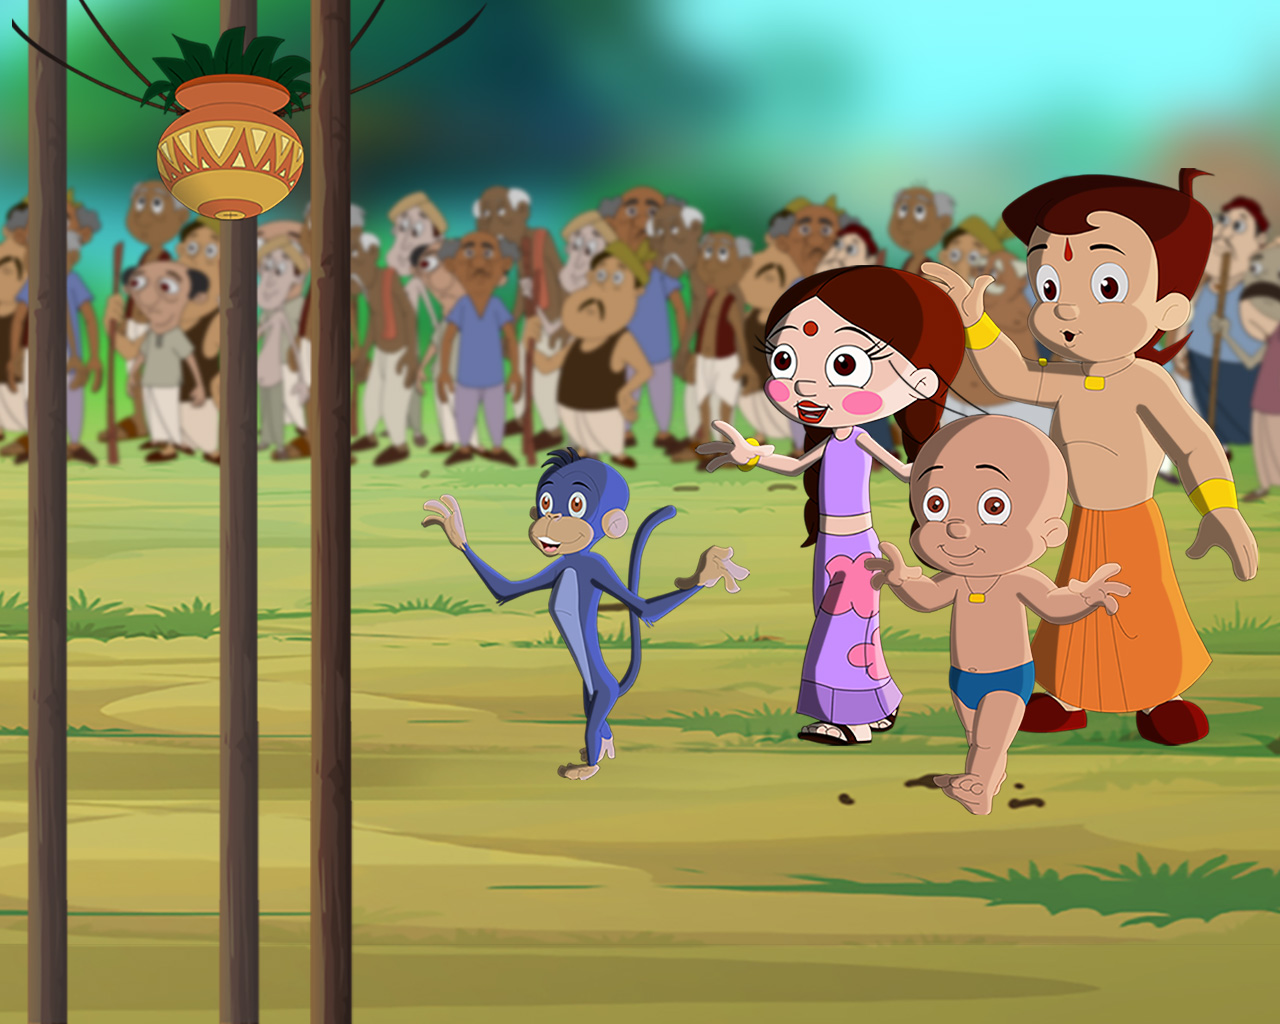 Awesome and Fun Chota Bheem Photos and Wallpapers for PC